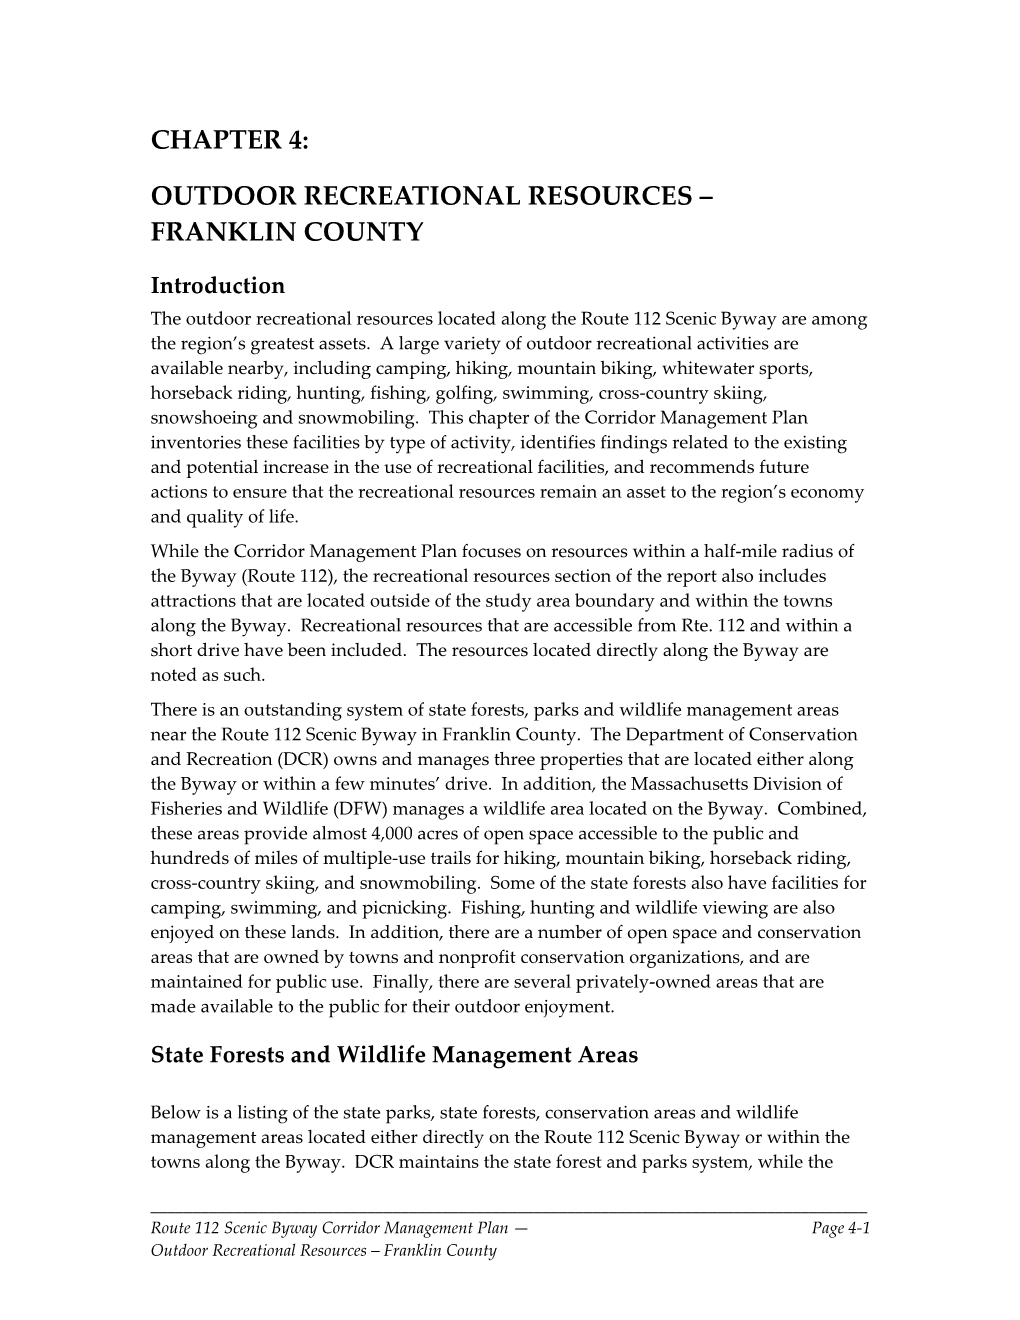 Outdoor Recreational Resources – Franklin County